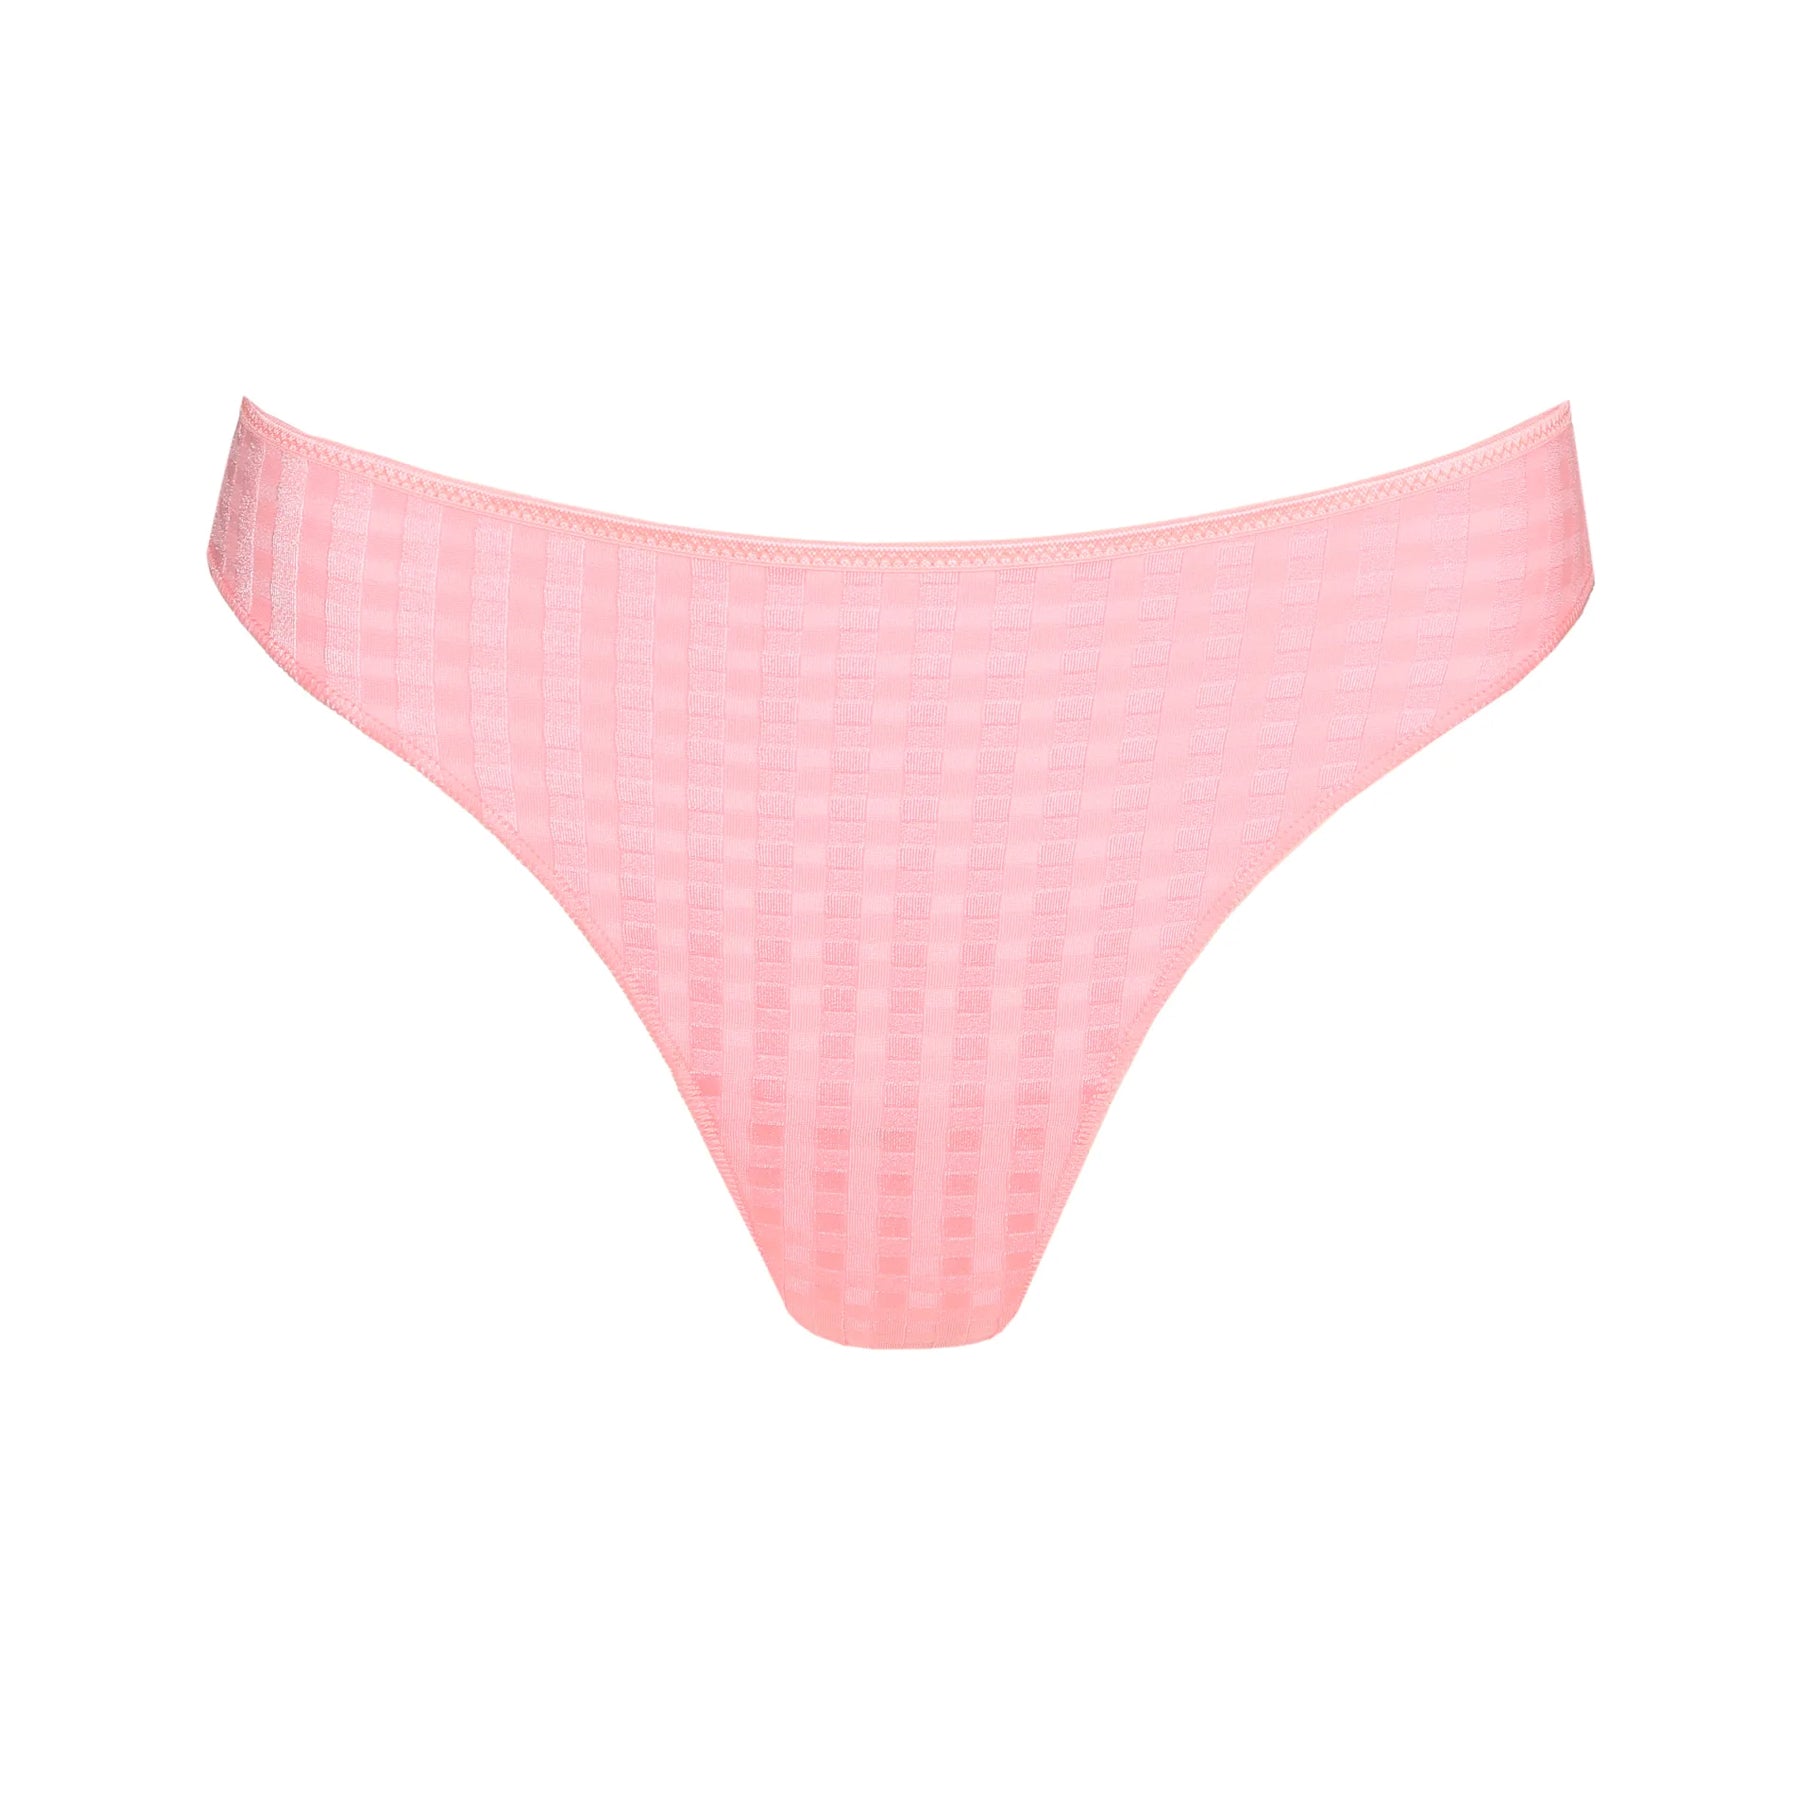 Milamay Mystique Crotchless Thongs in Pink